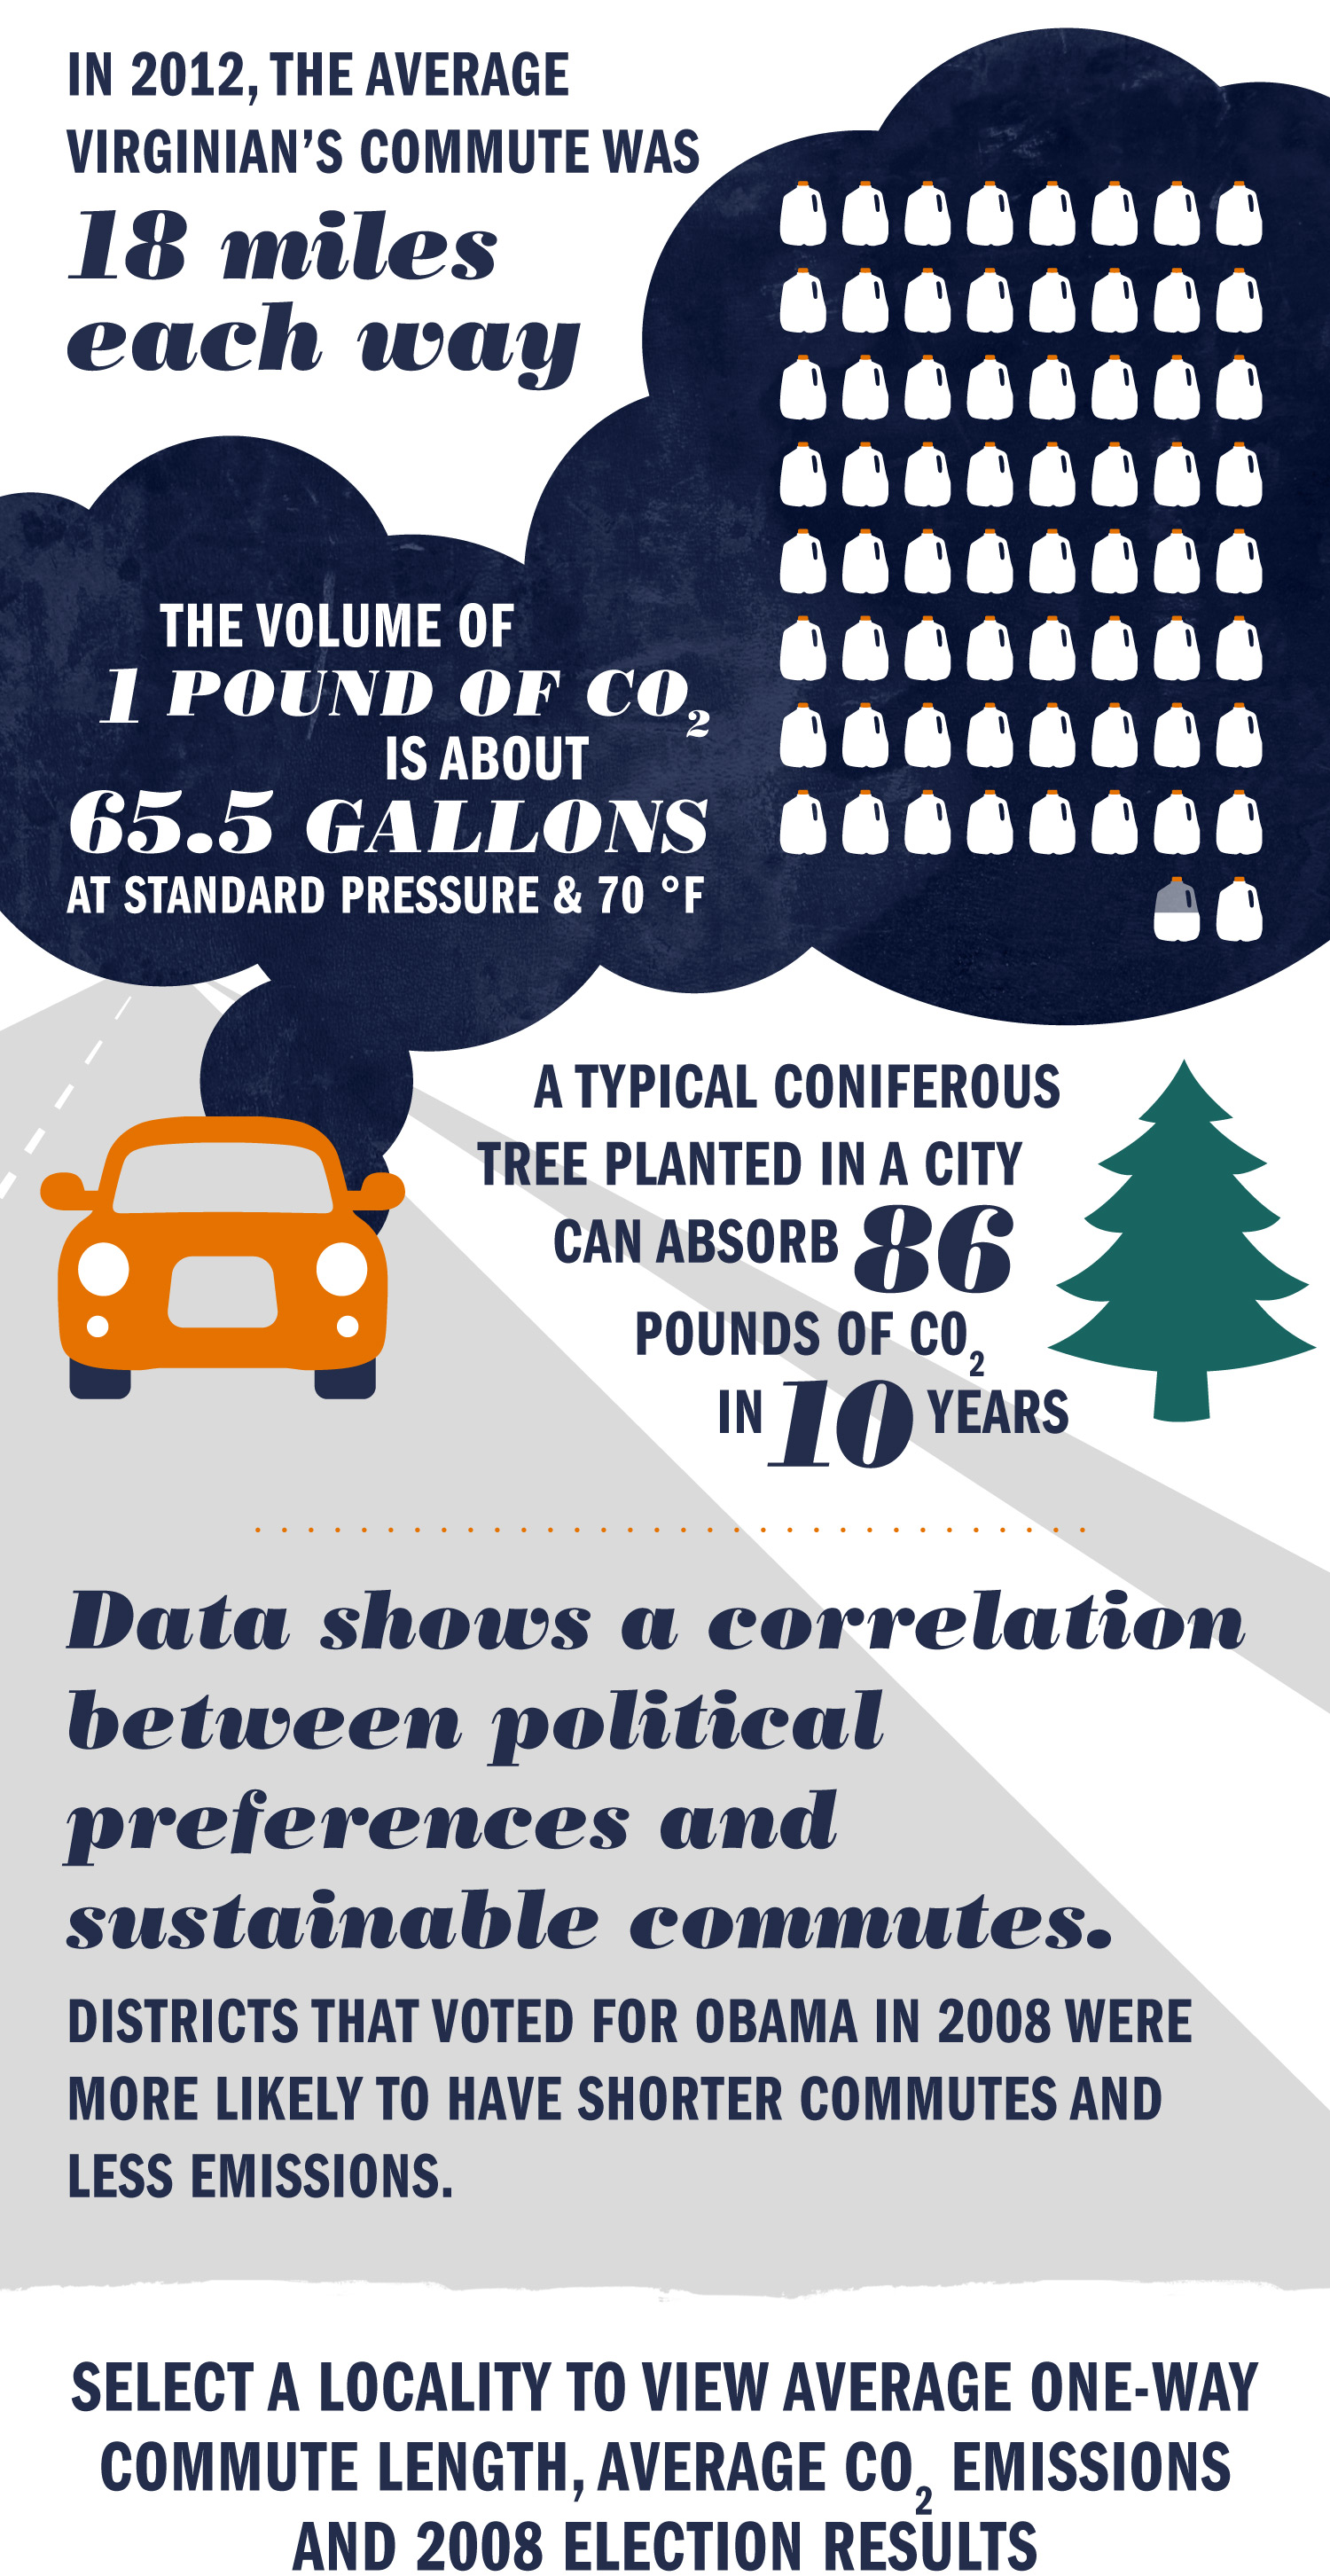 Text reads: in 2012 the average Virginian's commute was 18 miles each way the volume of 1 pound of CO2 is about 65.5 Gallons at standard pressure & 70 degrees fahrenheit a typical coniferous tree planted in a city can absorb 86 pounds of CO2 in 10 years.  Data shows a correlation between political preferences and sustainable commutes